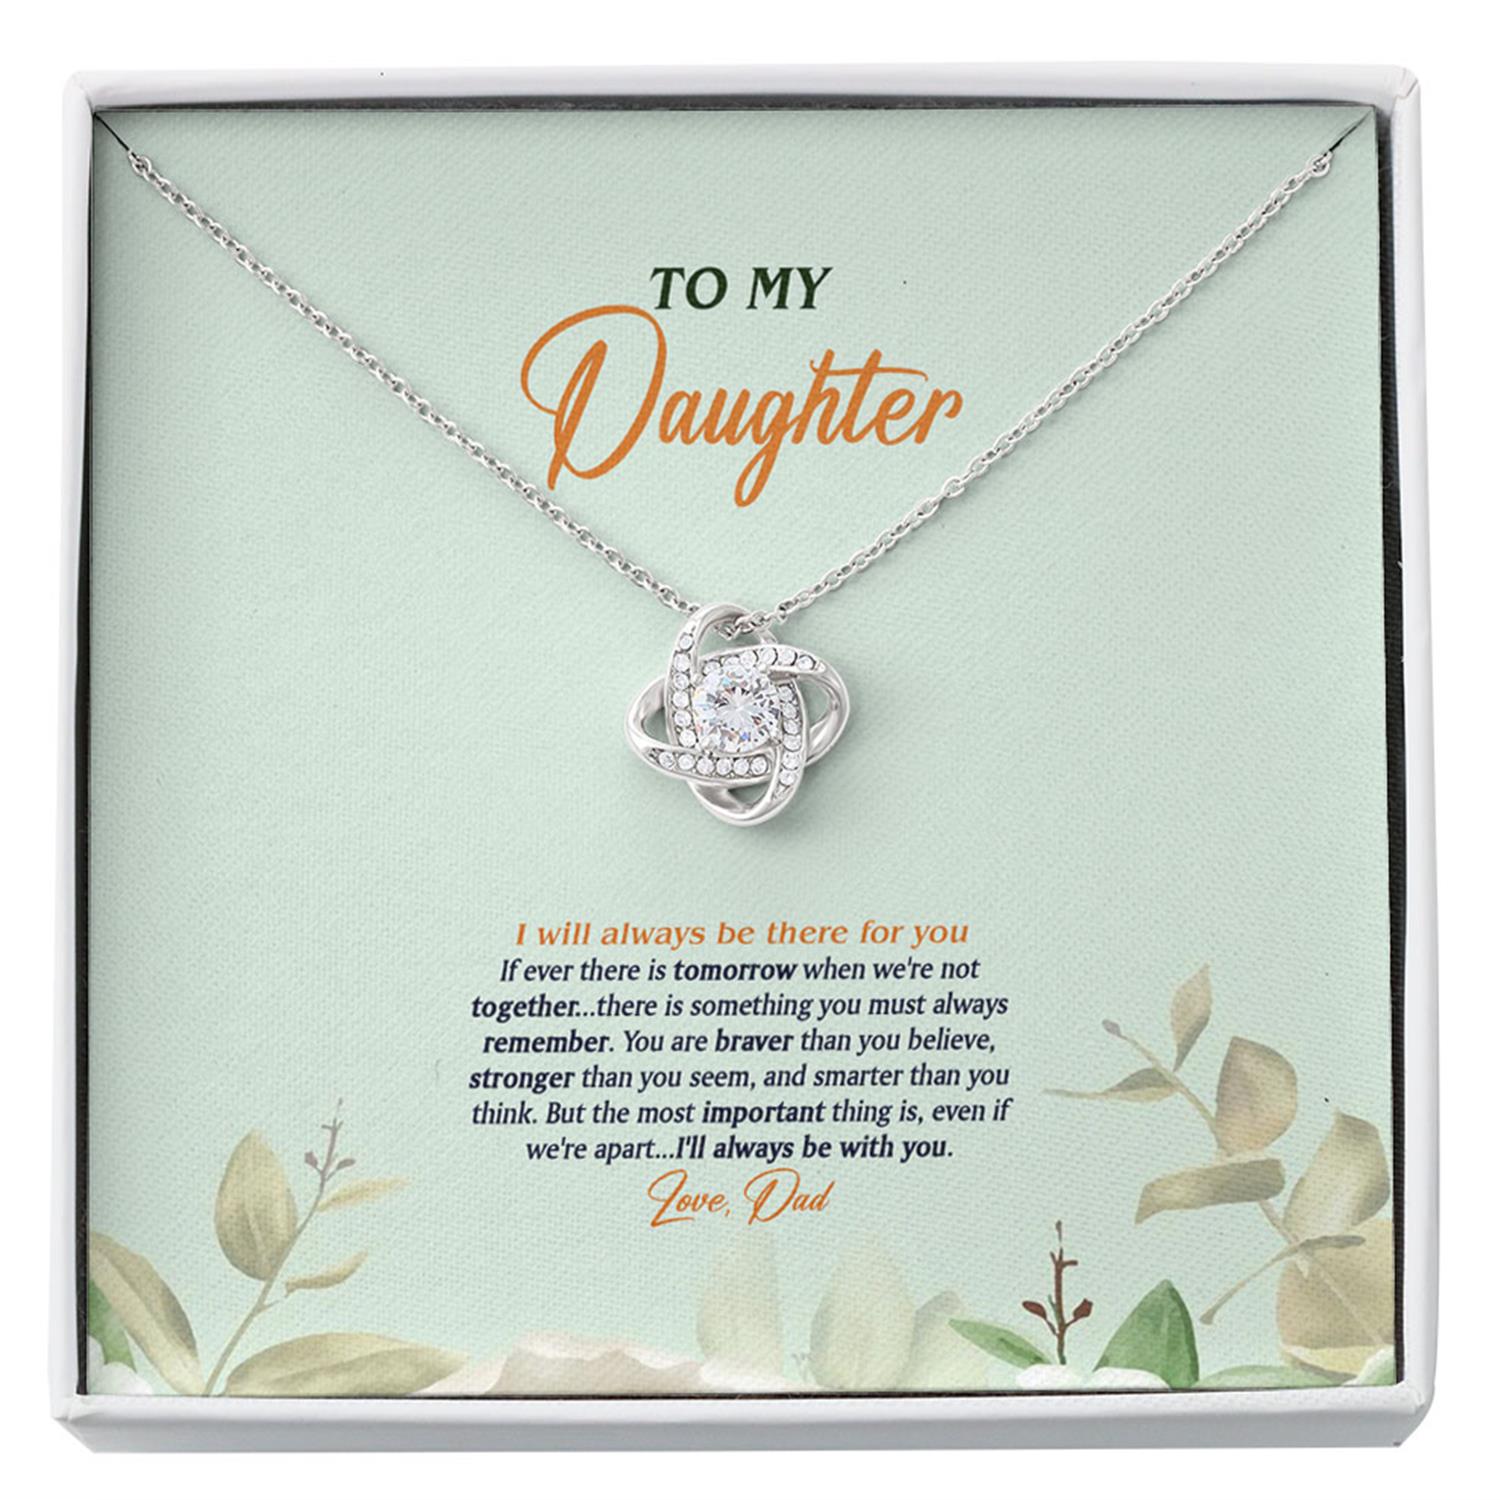 Daughter Necklace, To My Daughter Necklace Gift From Dad "There For You - Stronger Than You Seem" Custom Necklace